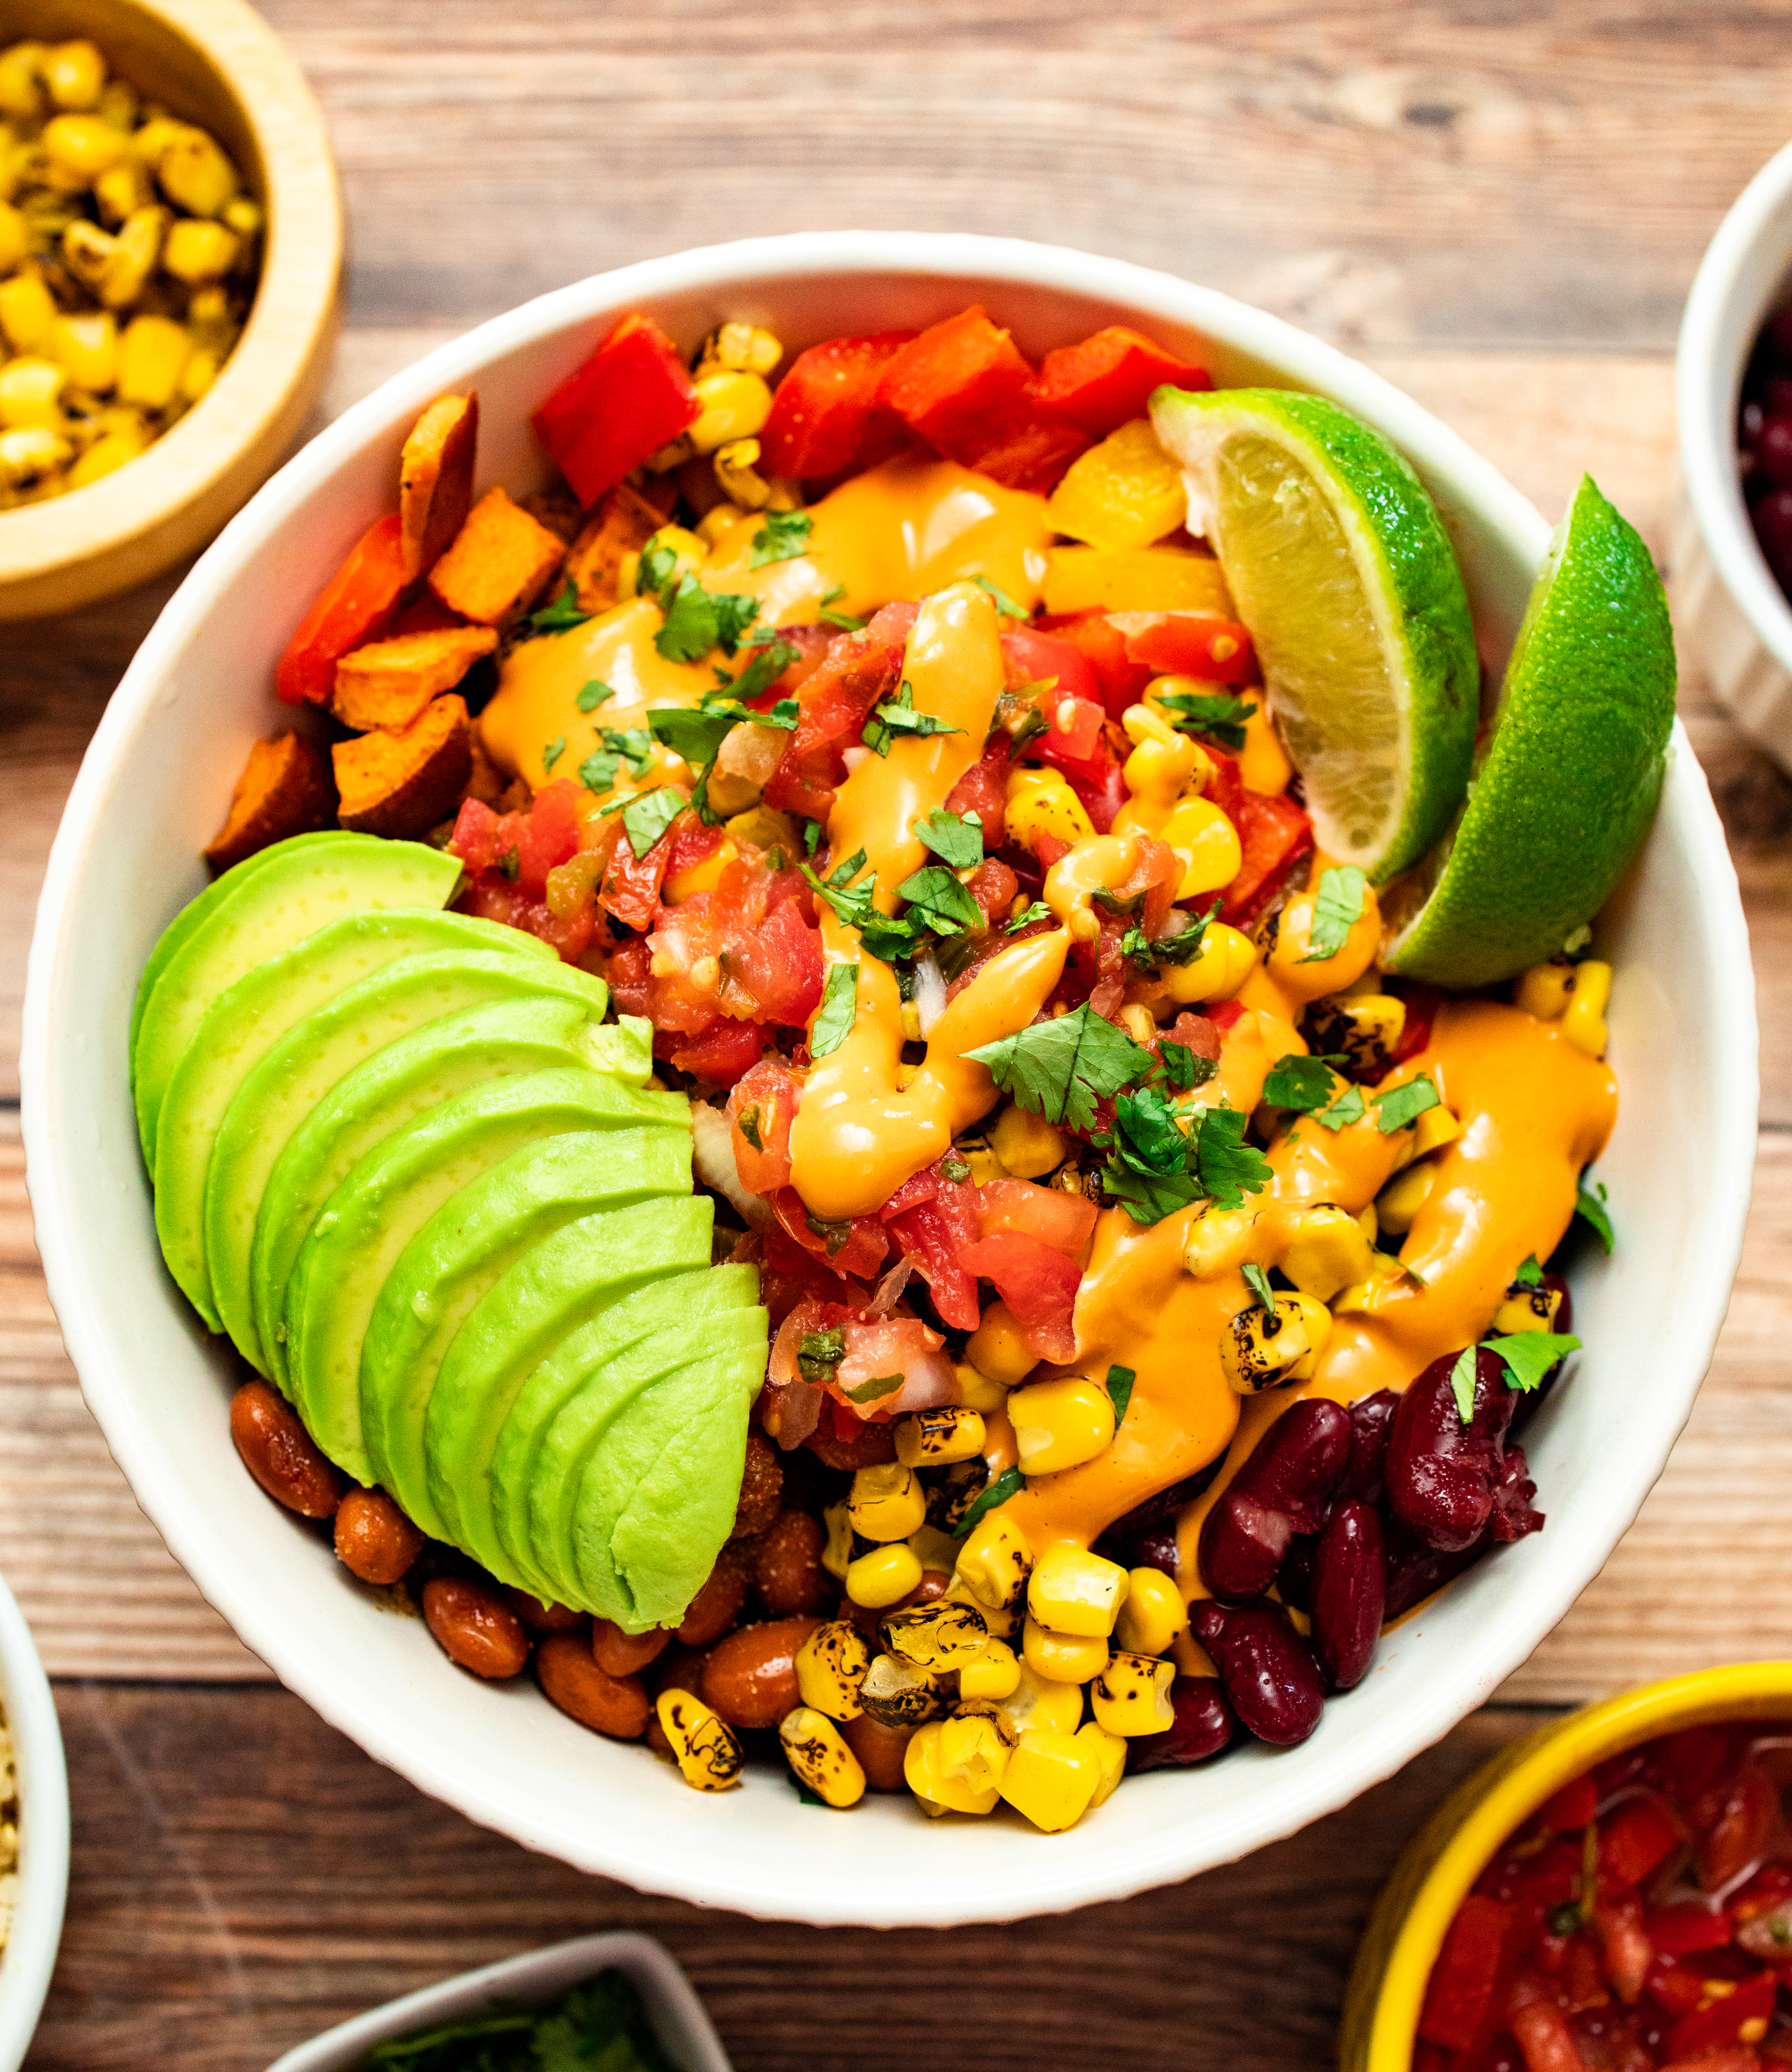 High-Protein Vegan Mexican Fiesta Salad | Great for Meal Prep | Easy Vegan Queso recipe | Plant-based and Gluten-free